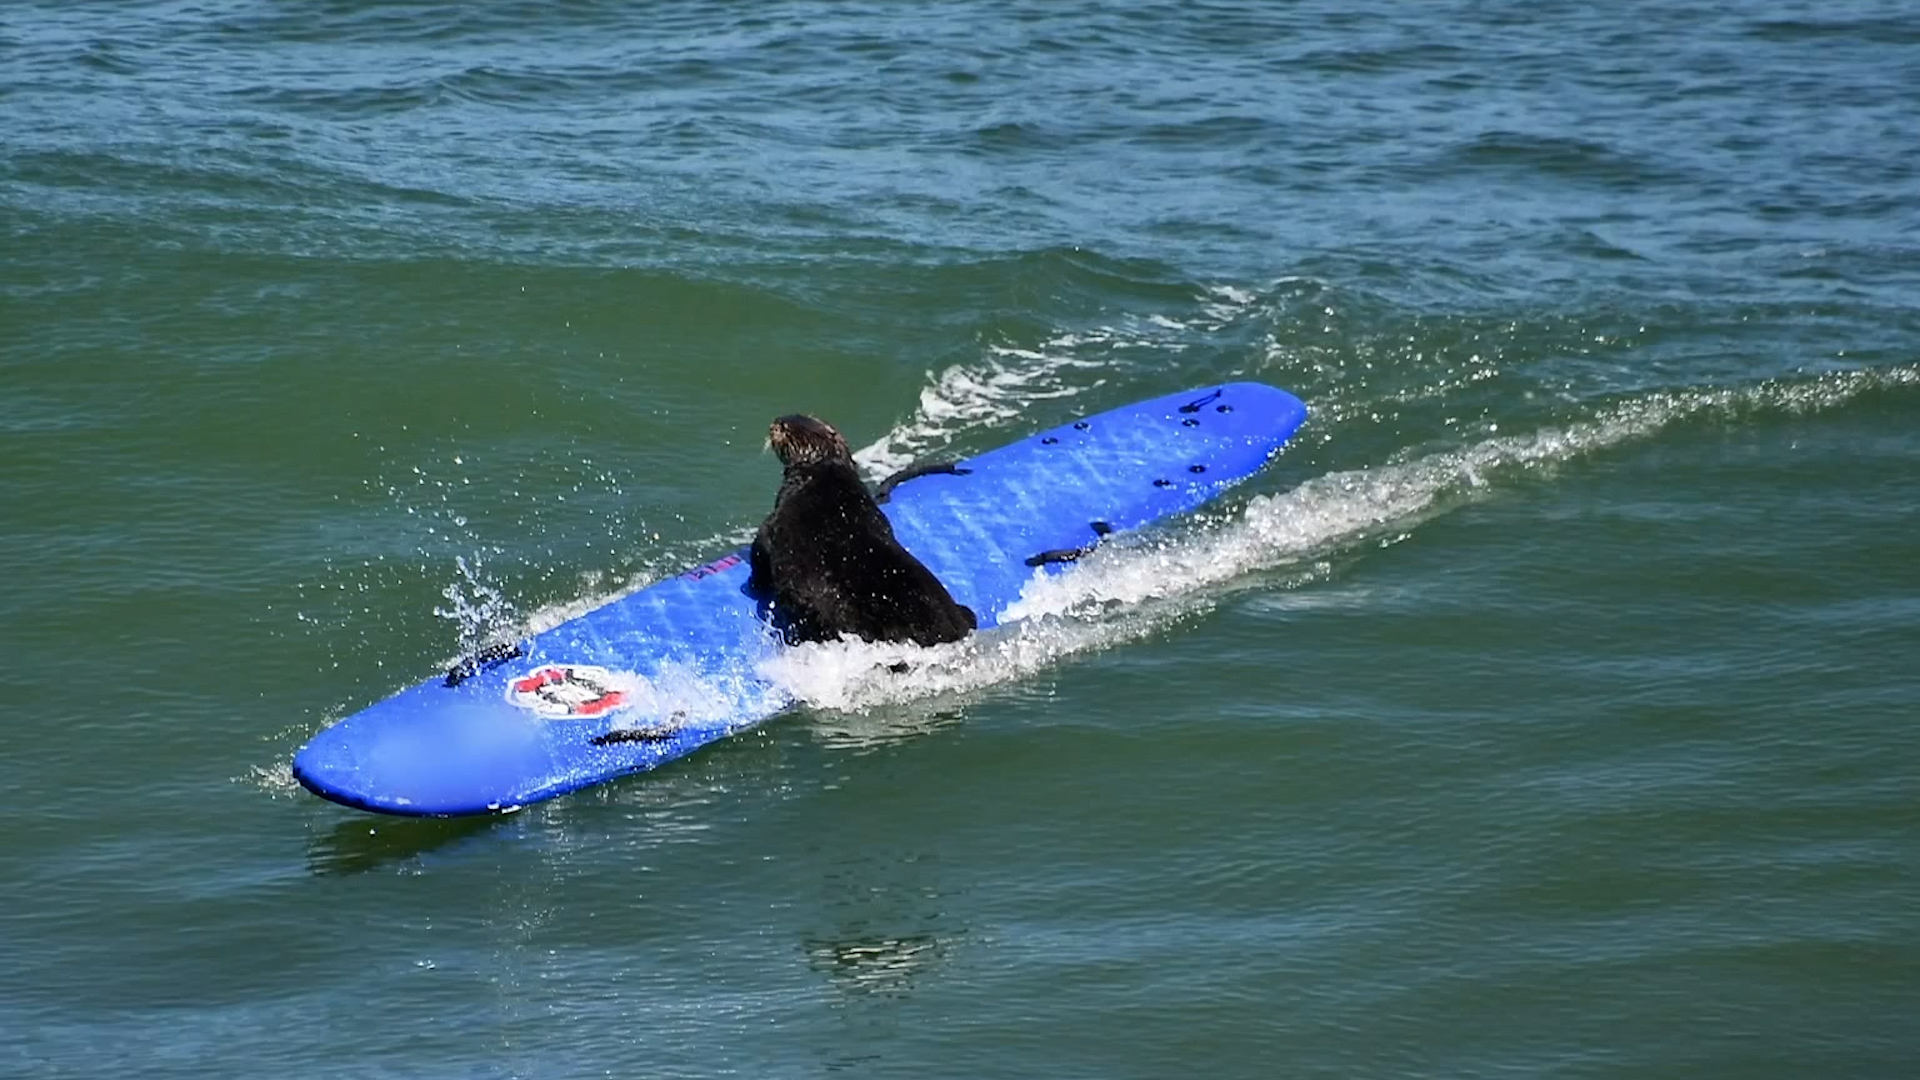 This surfboard-stealing sea otter sure is